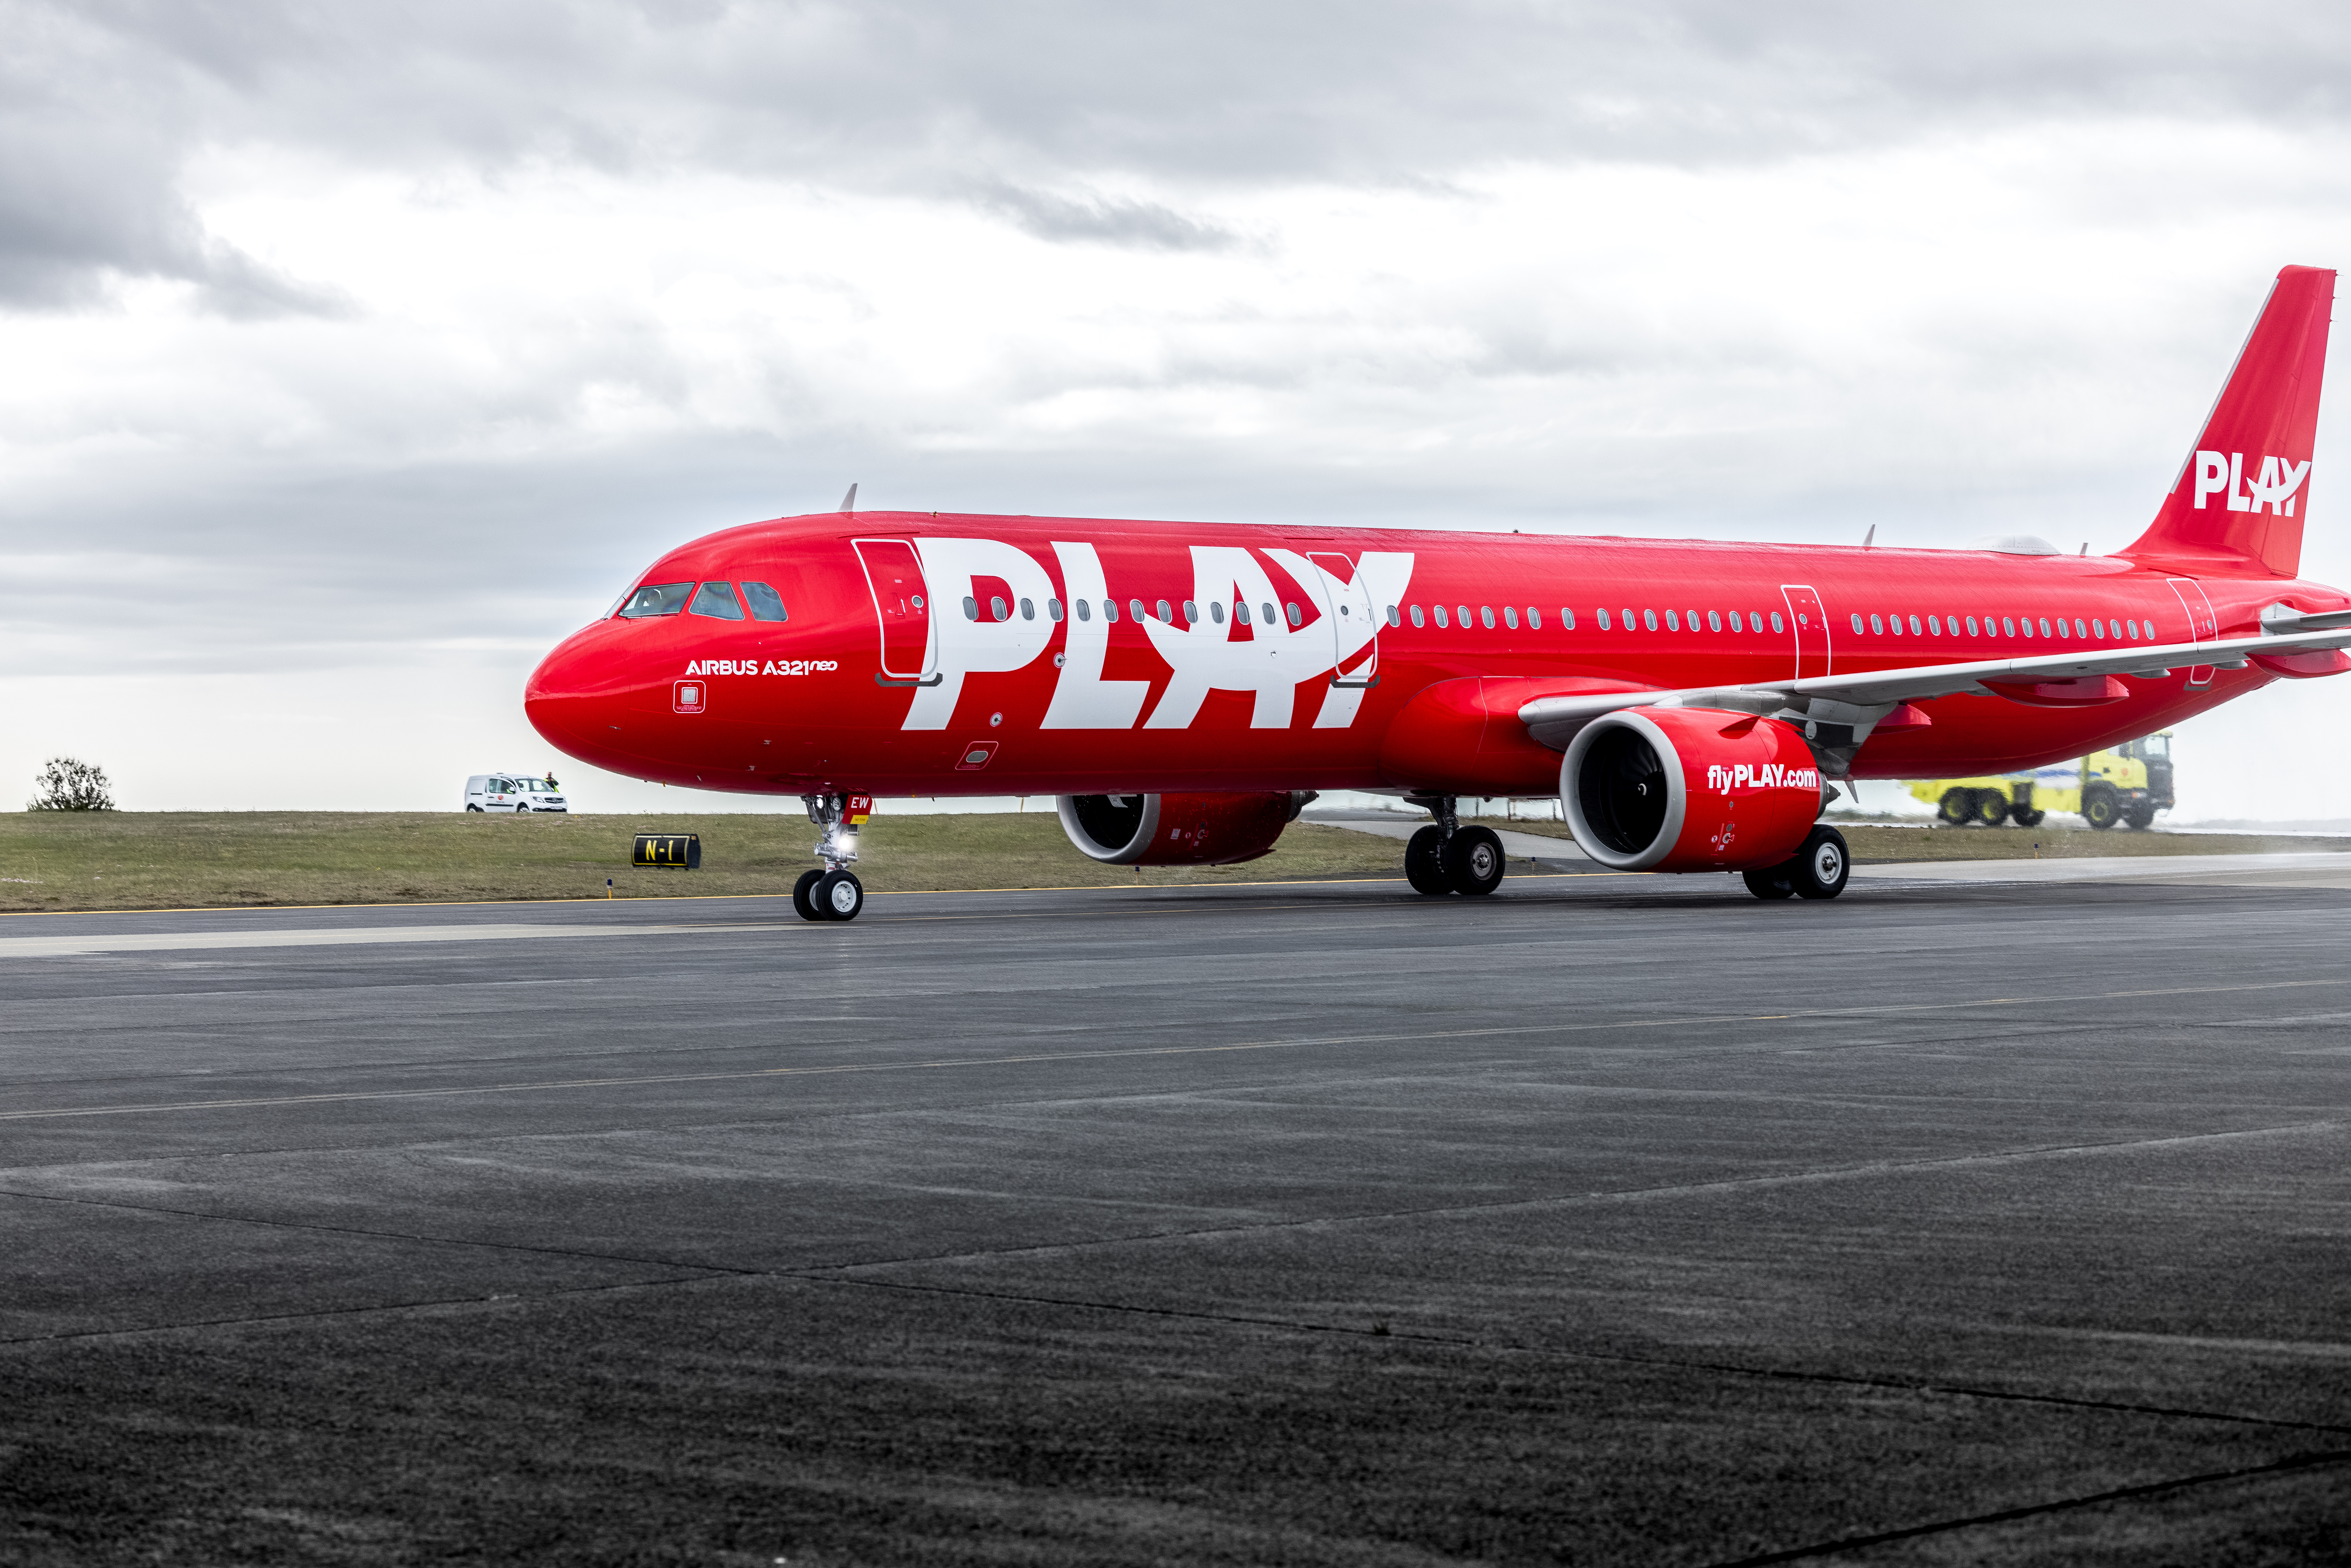 PLAY celebrates one year in the skies